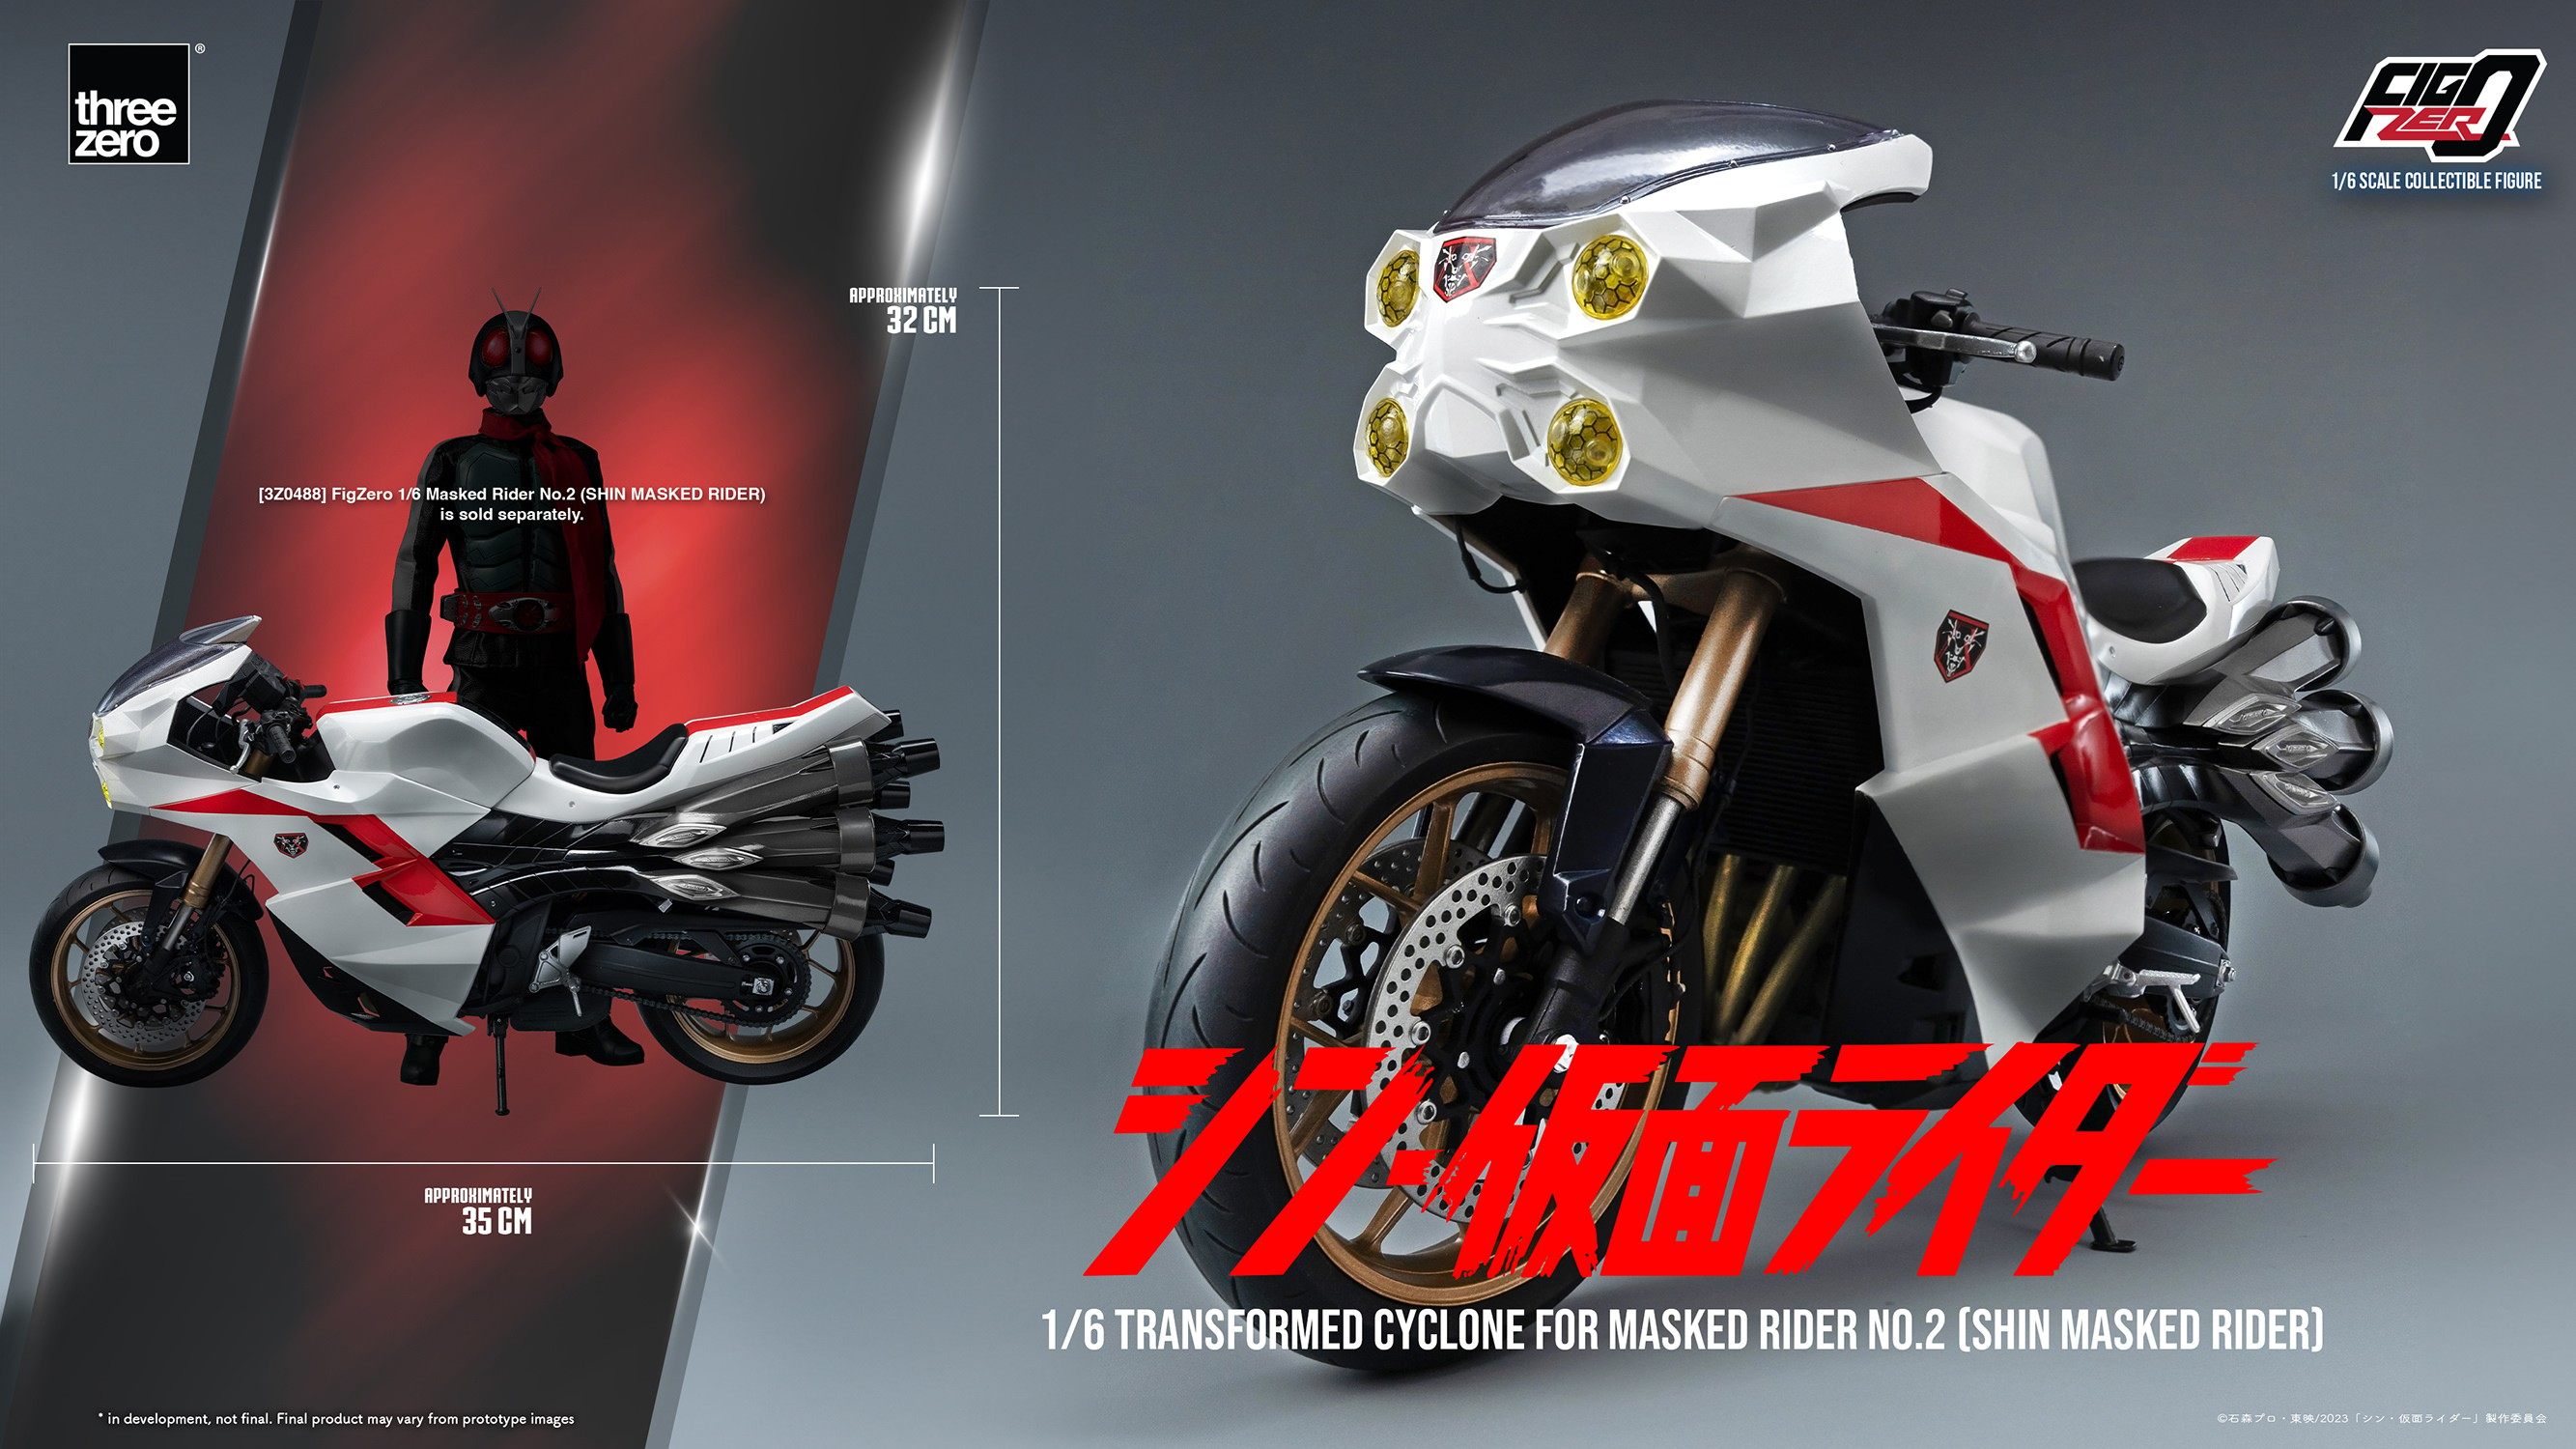 Transformed Cyclone for Masked Rider No. 2 (Shin Masked Rider) (Prototype Shown) View 19